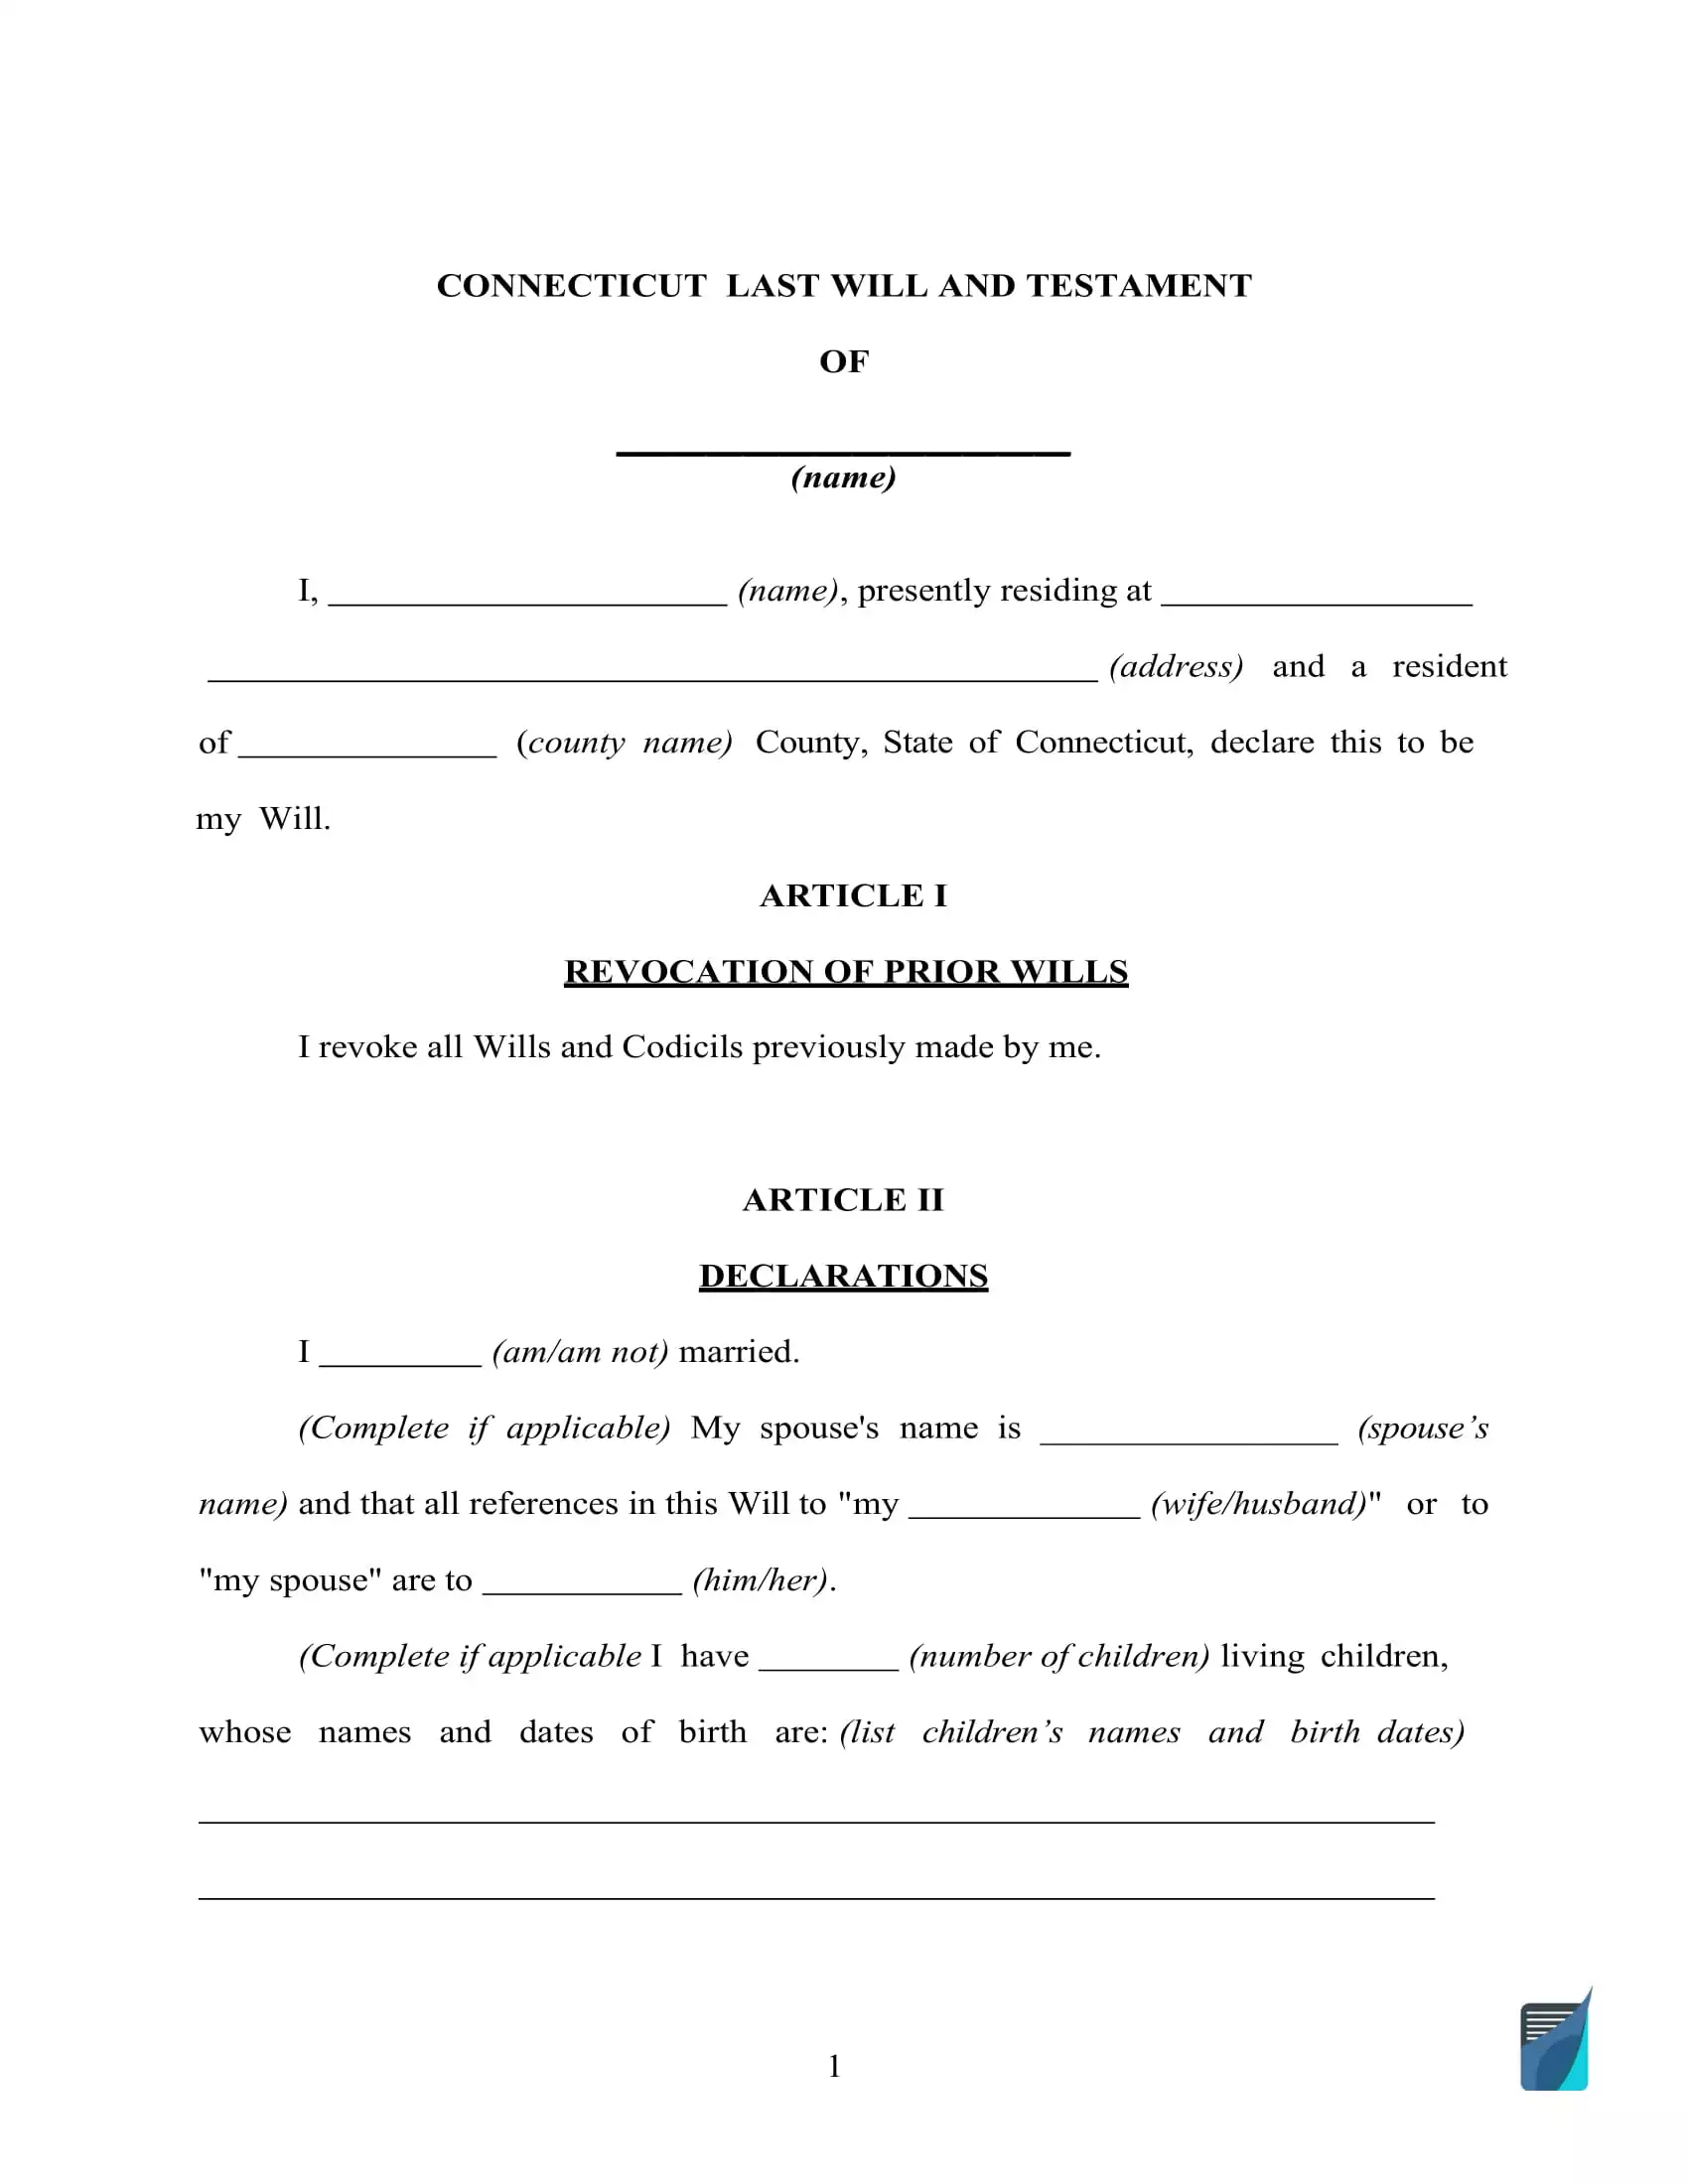 connecticut-last-will-and-testament-template